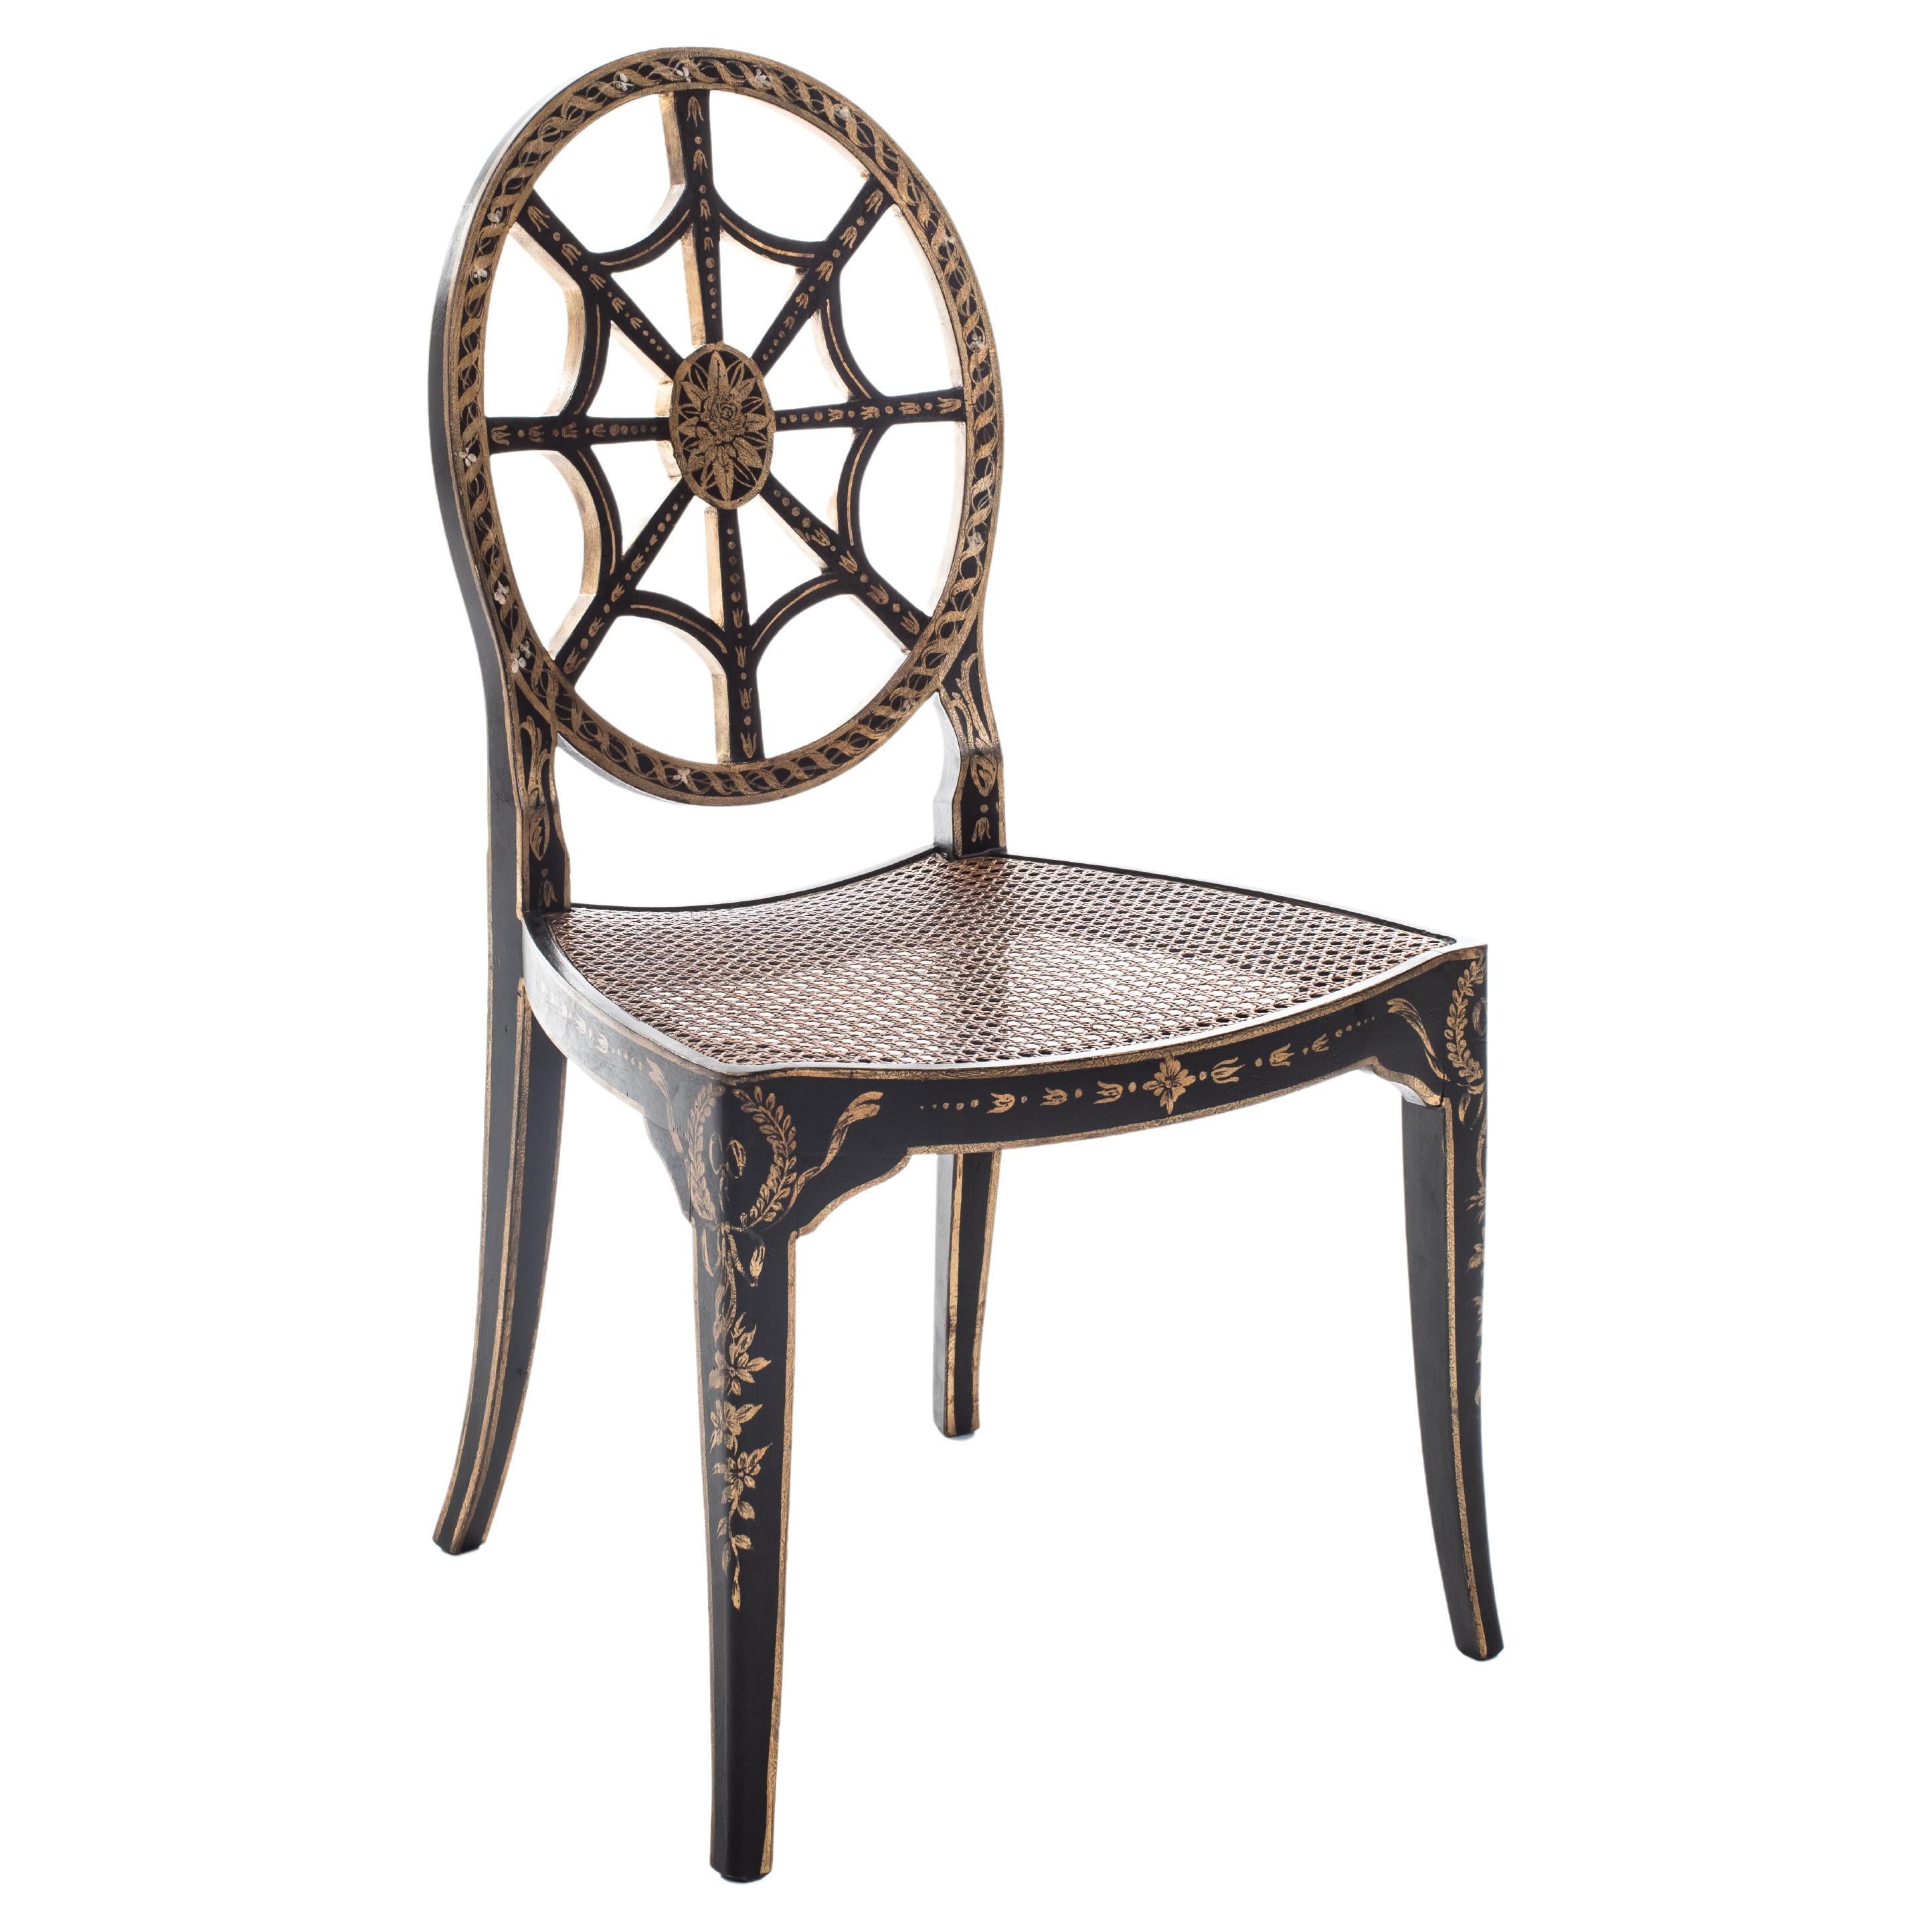 18th Century Hand-Painted Venetian Black Aquileia Dining Chair with Cane Seat